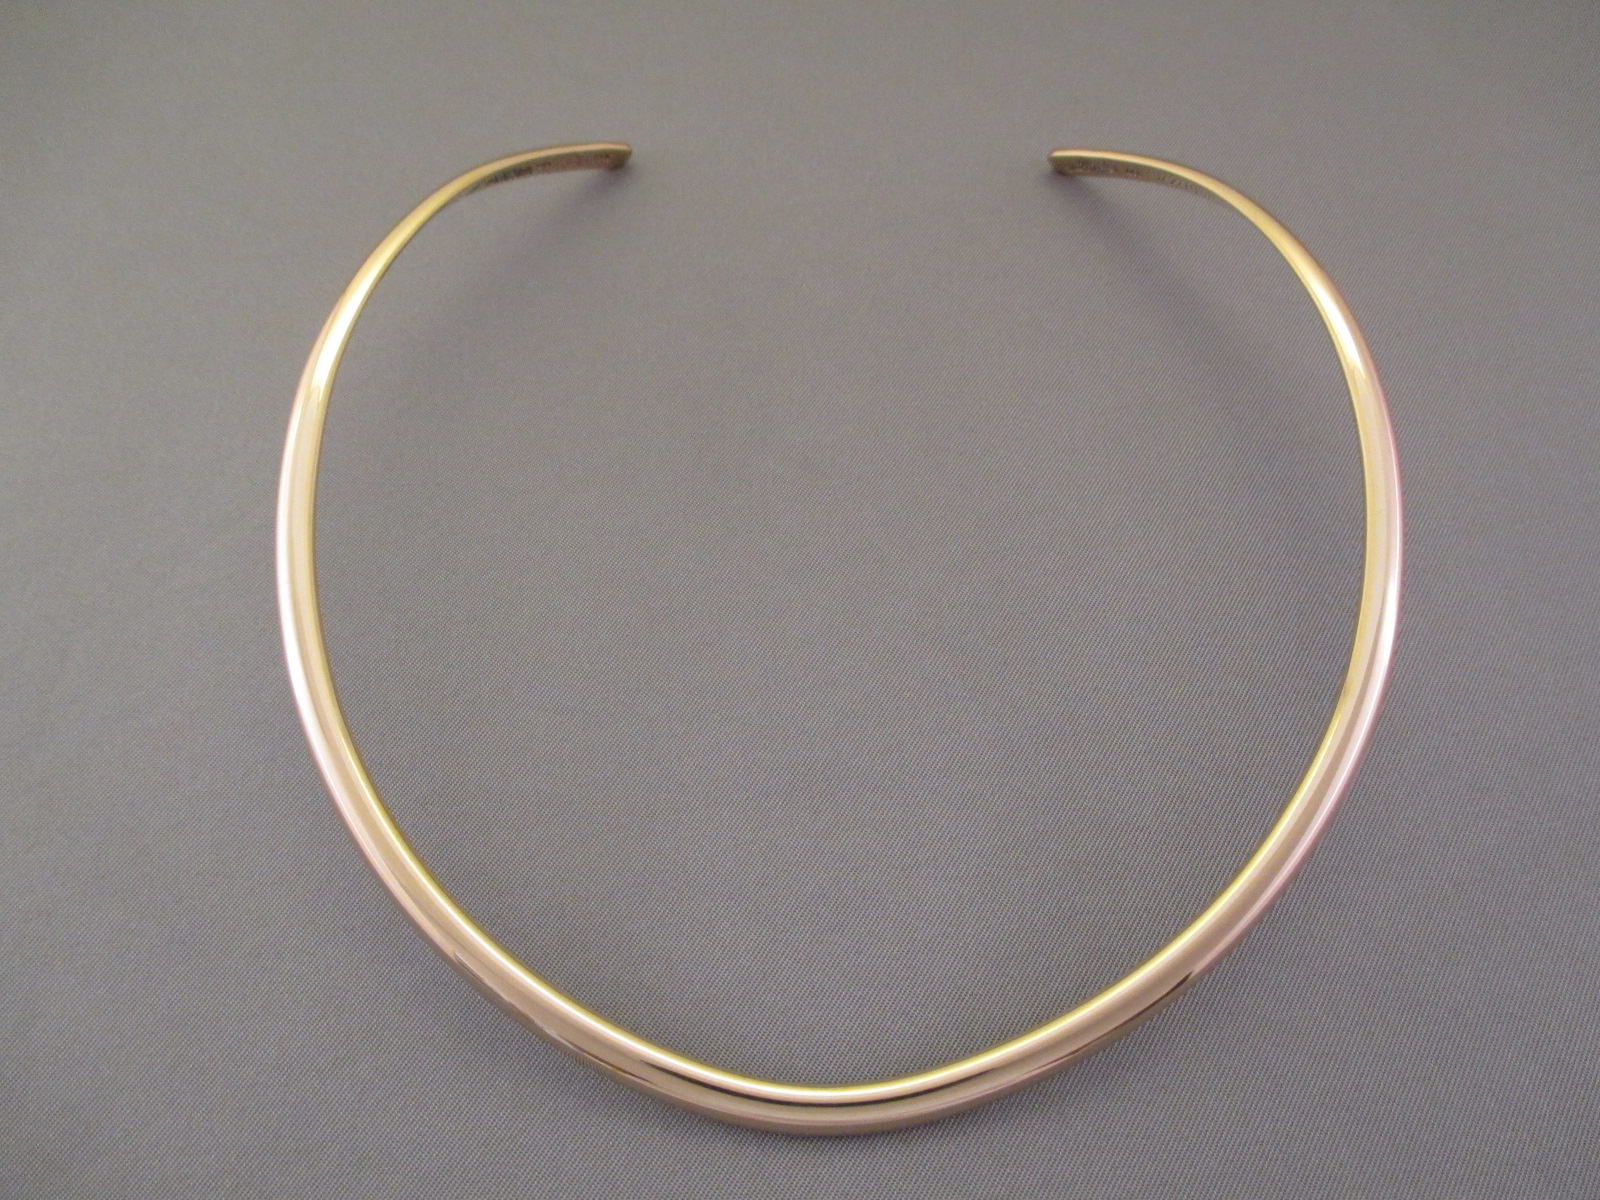 Gold Collar - 14kt Gold Collar Necklace by Native American Indian jewelry artist, Artie Yellowhorse $4,500-